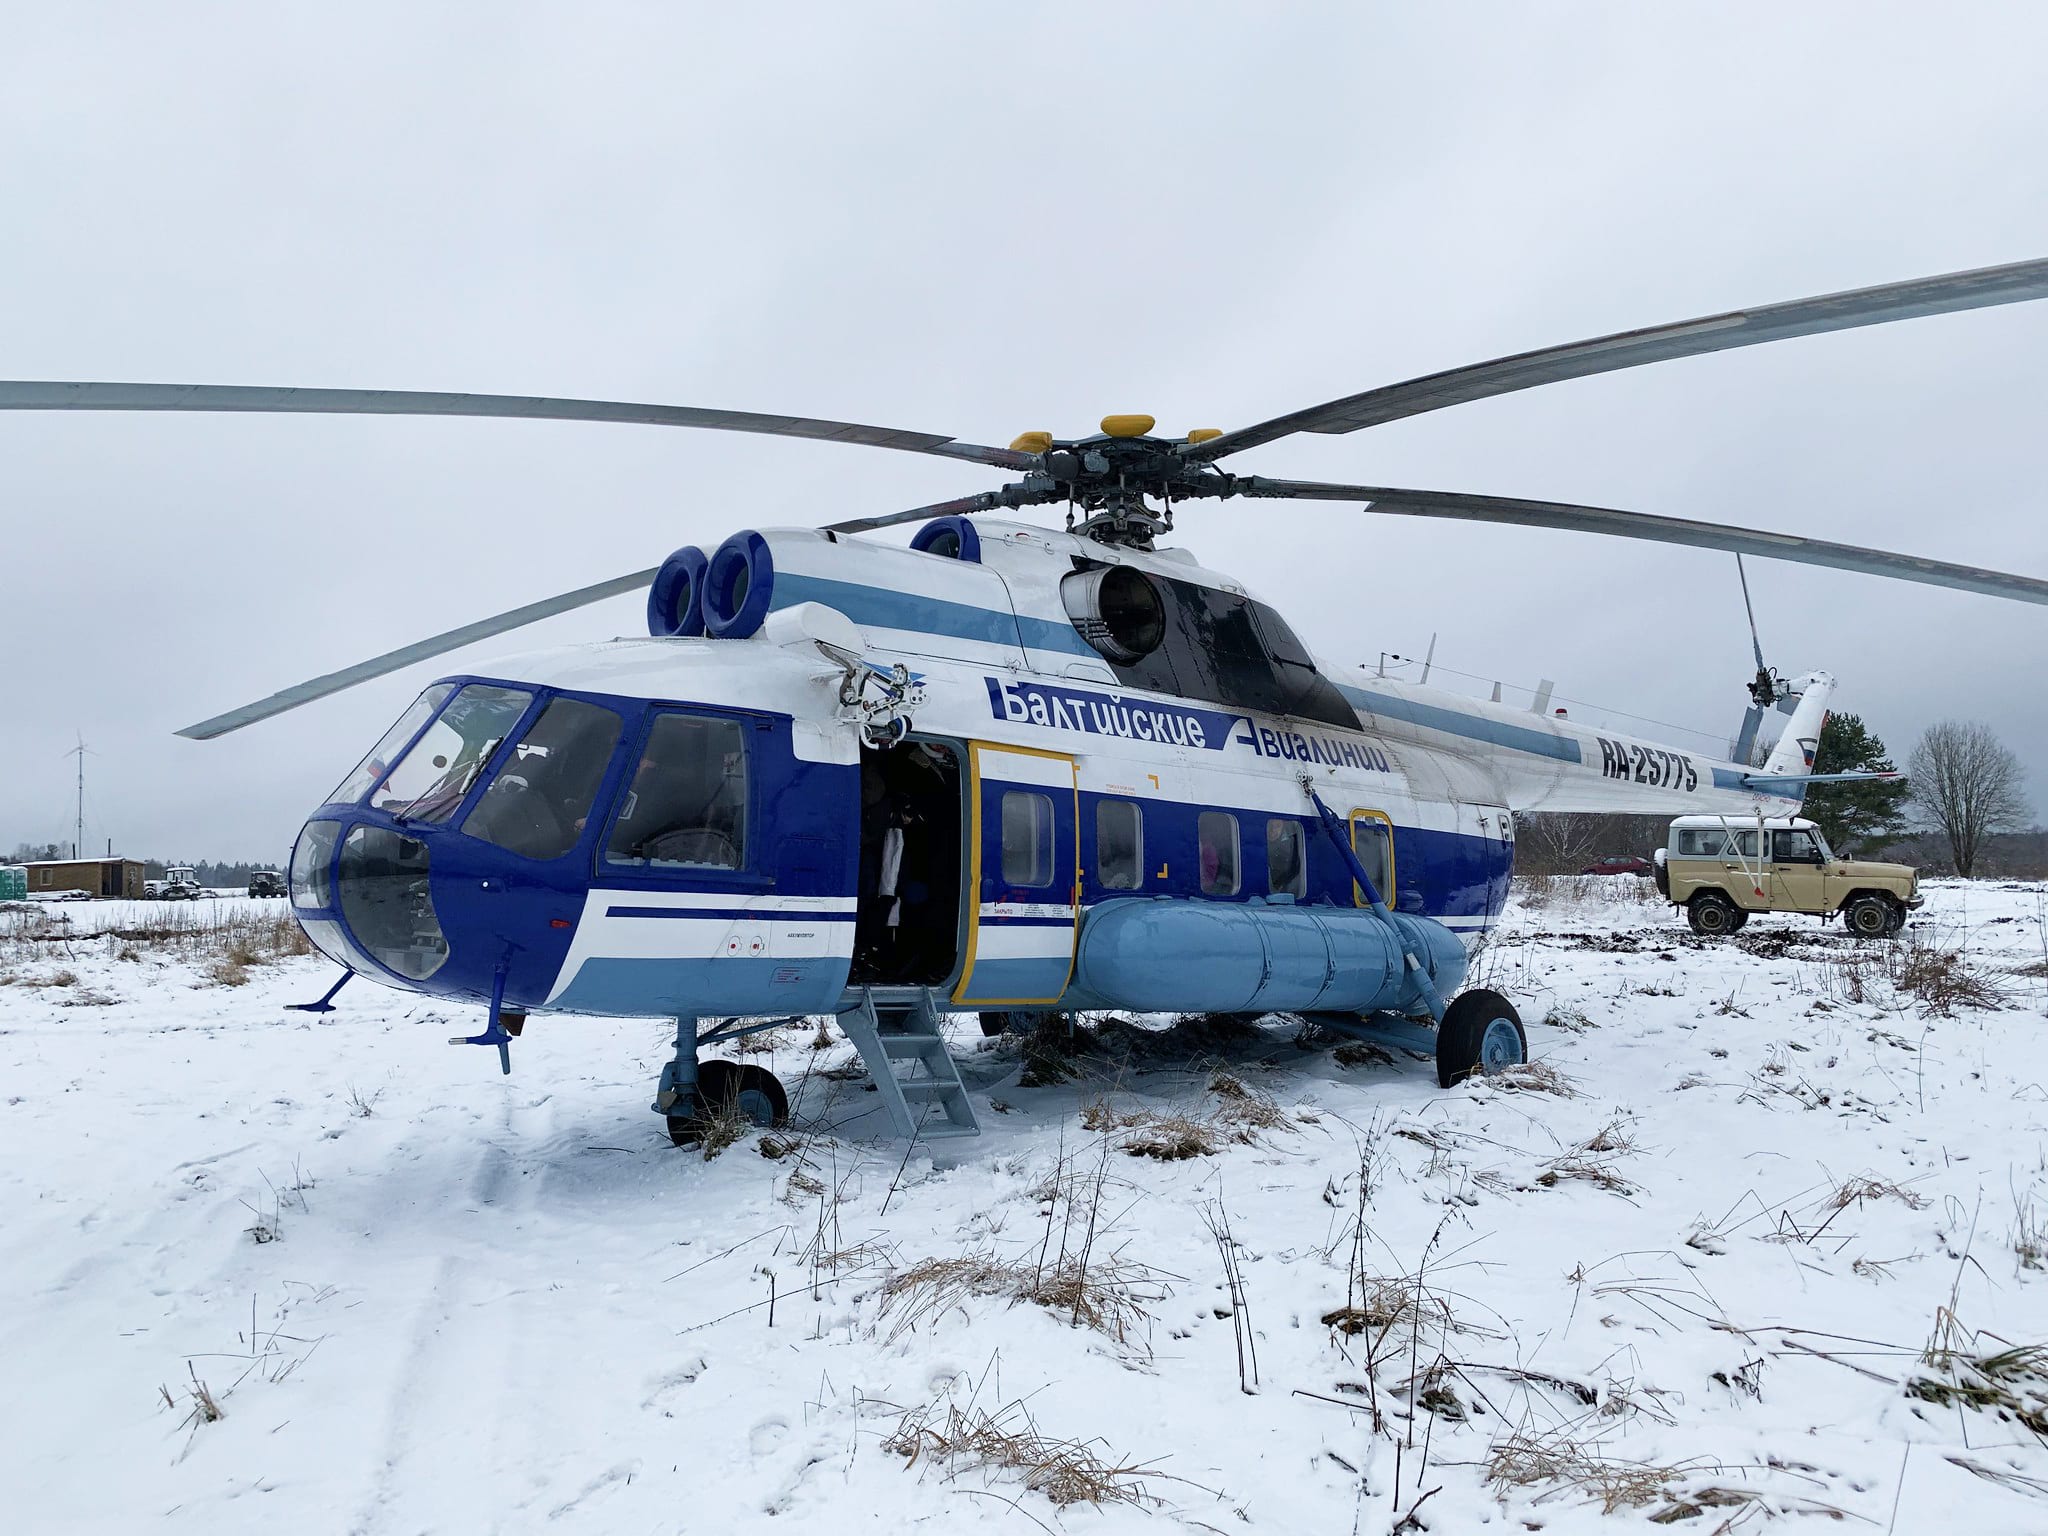 helicoptere-militaire-russe-Mil-Mi-8-balt-airlines-saint-petersbourg-neige-seminaire-immersif-russie-agence-WATO-international-1